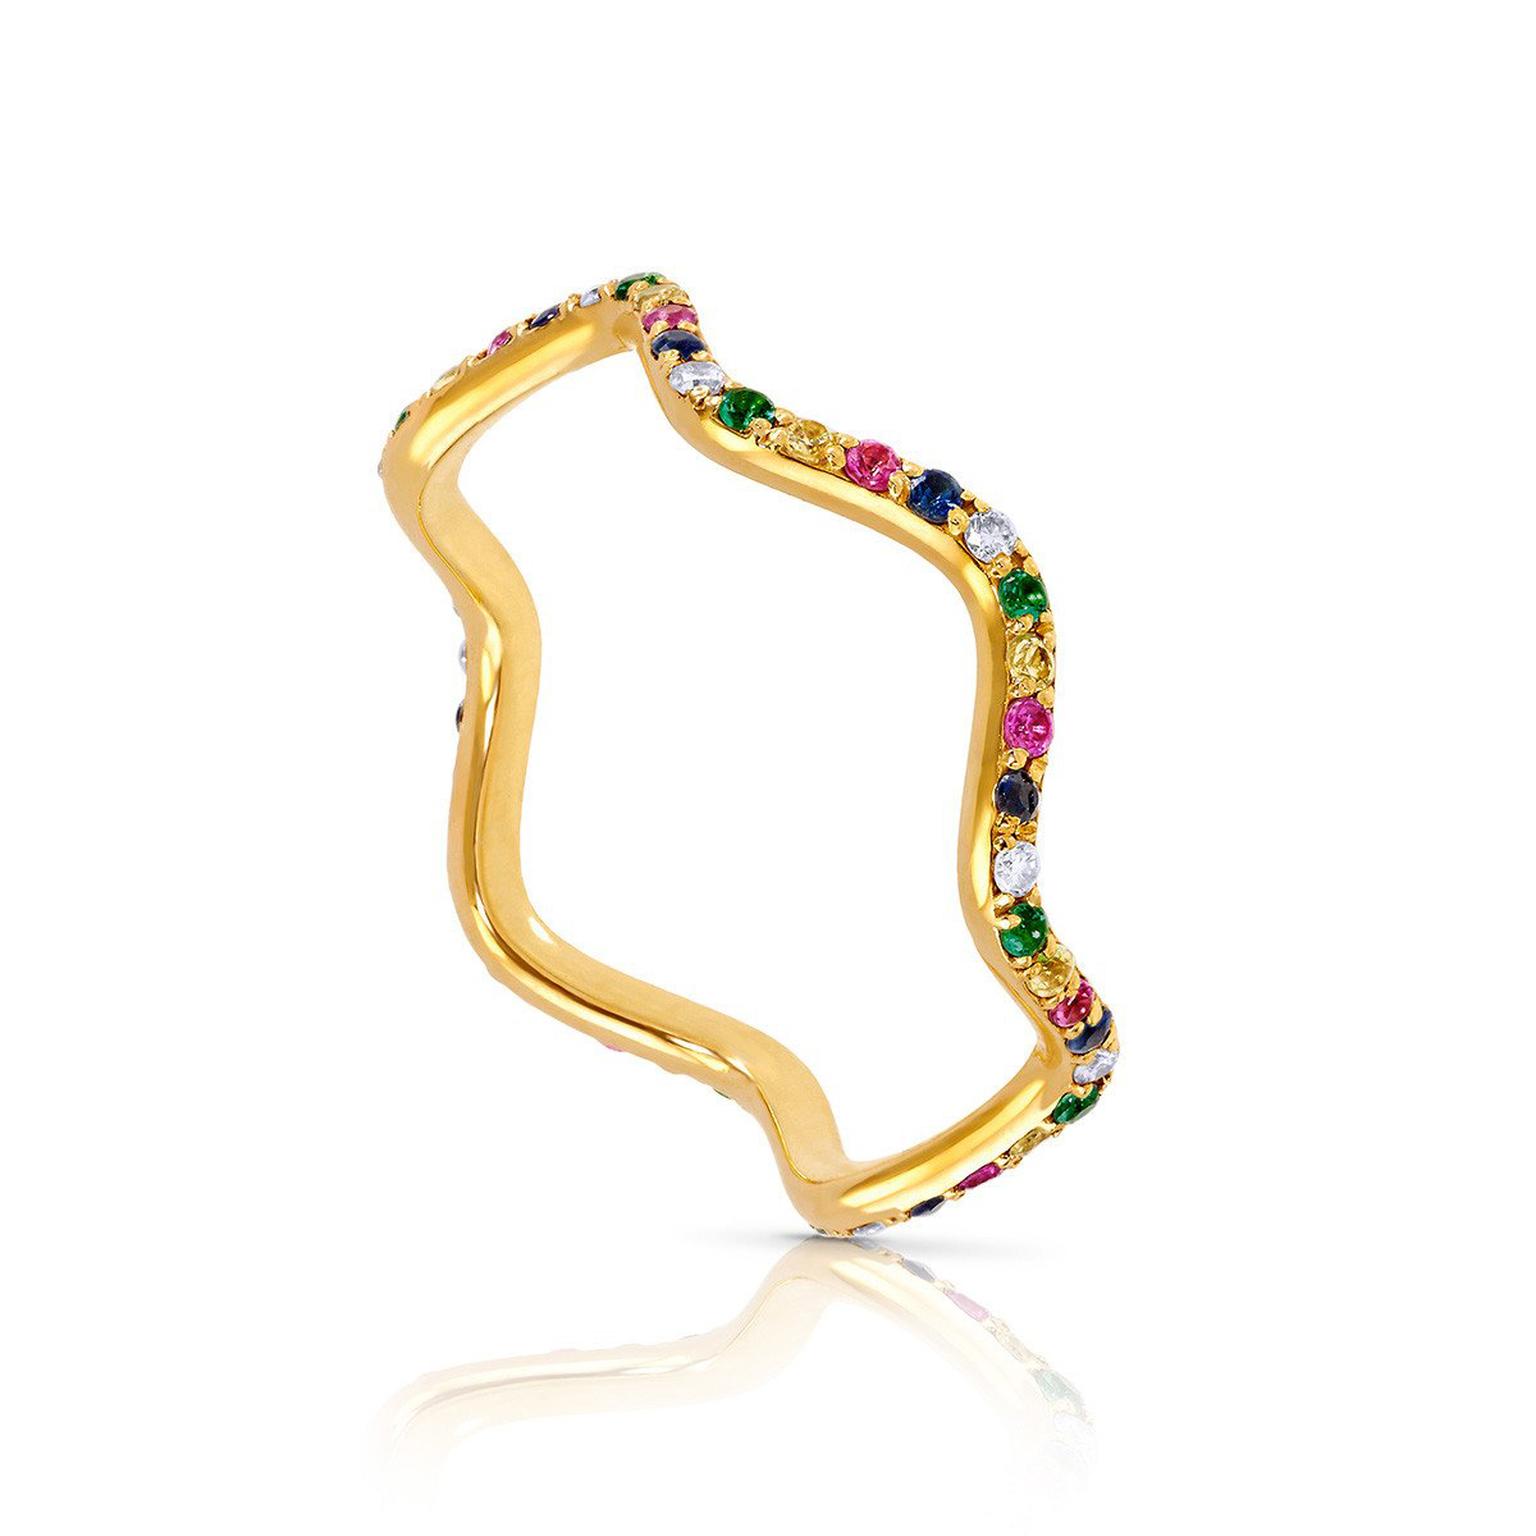 Sabine Getty Baby Memphis Wave band with multi-coloured gemstones